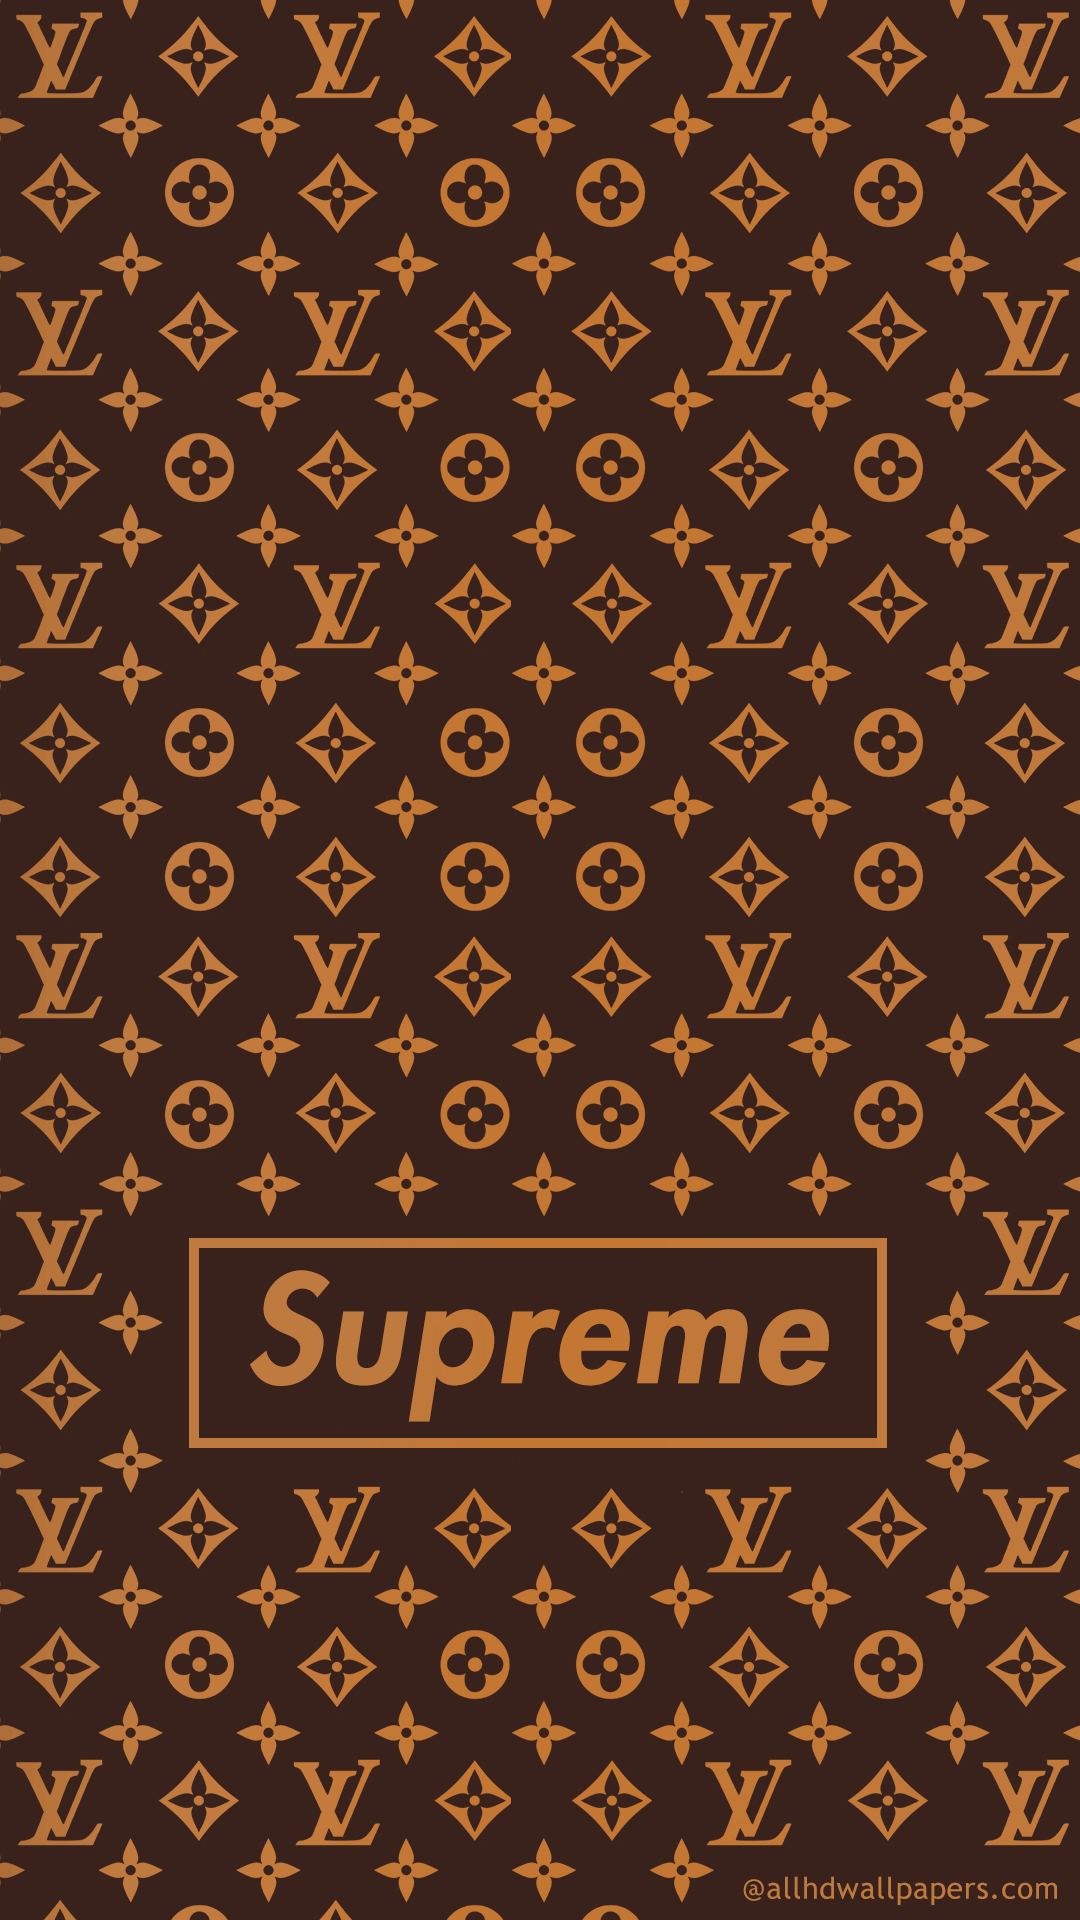 Download Get the luxury look with the Louis Vuitton Iphone Wallpaper